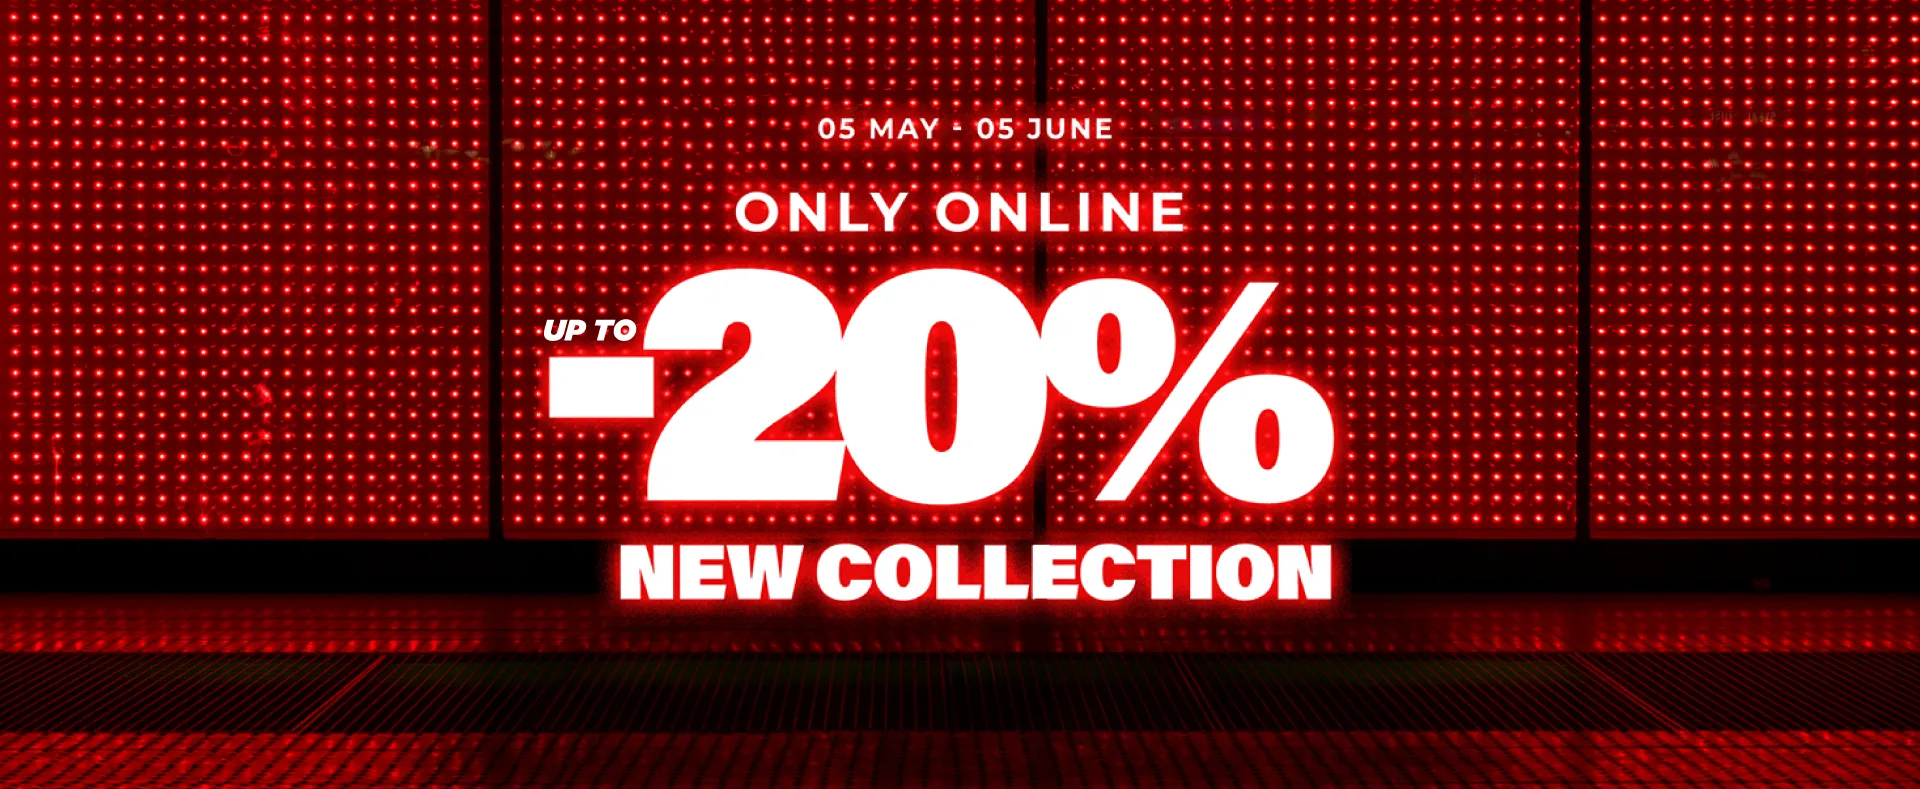 NEW COLLECTION UP TO 20%